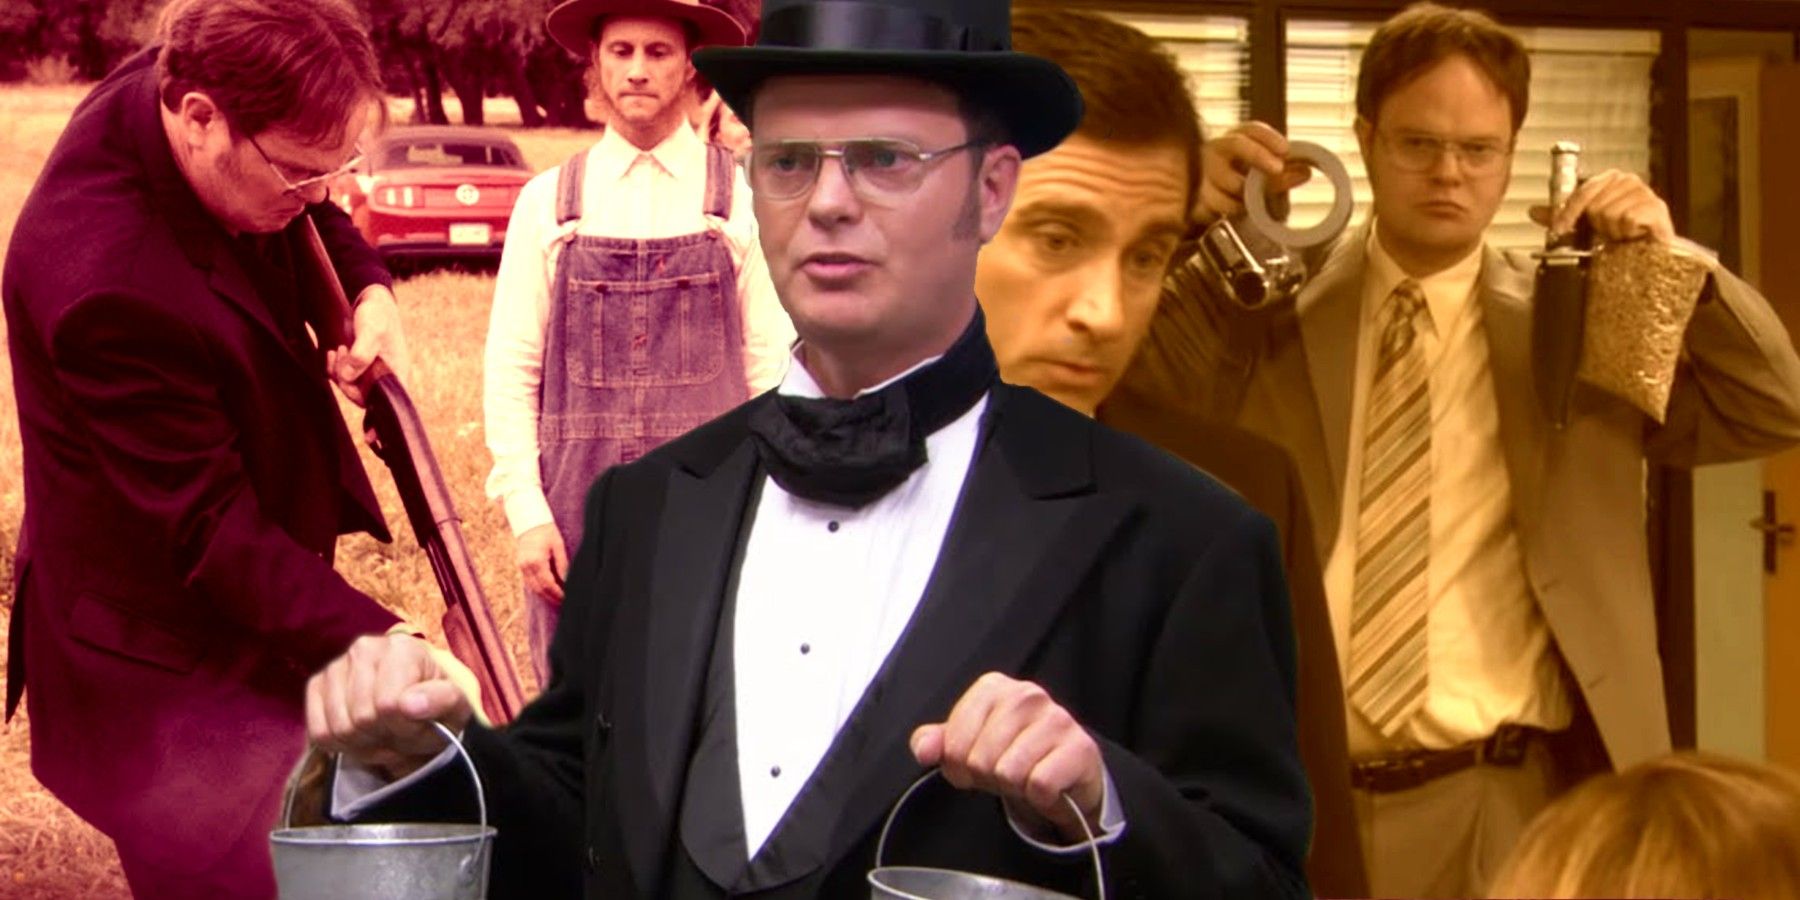 The Office: Every Obscure Schrute Family Tradition Explained